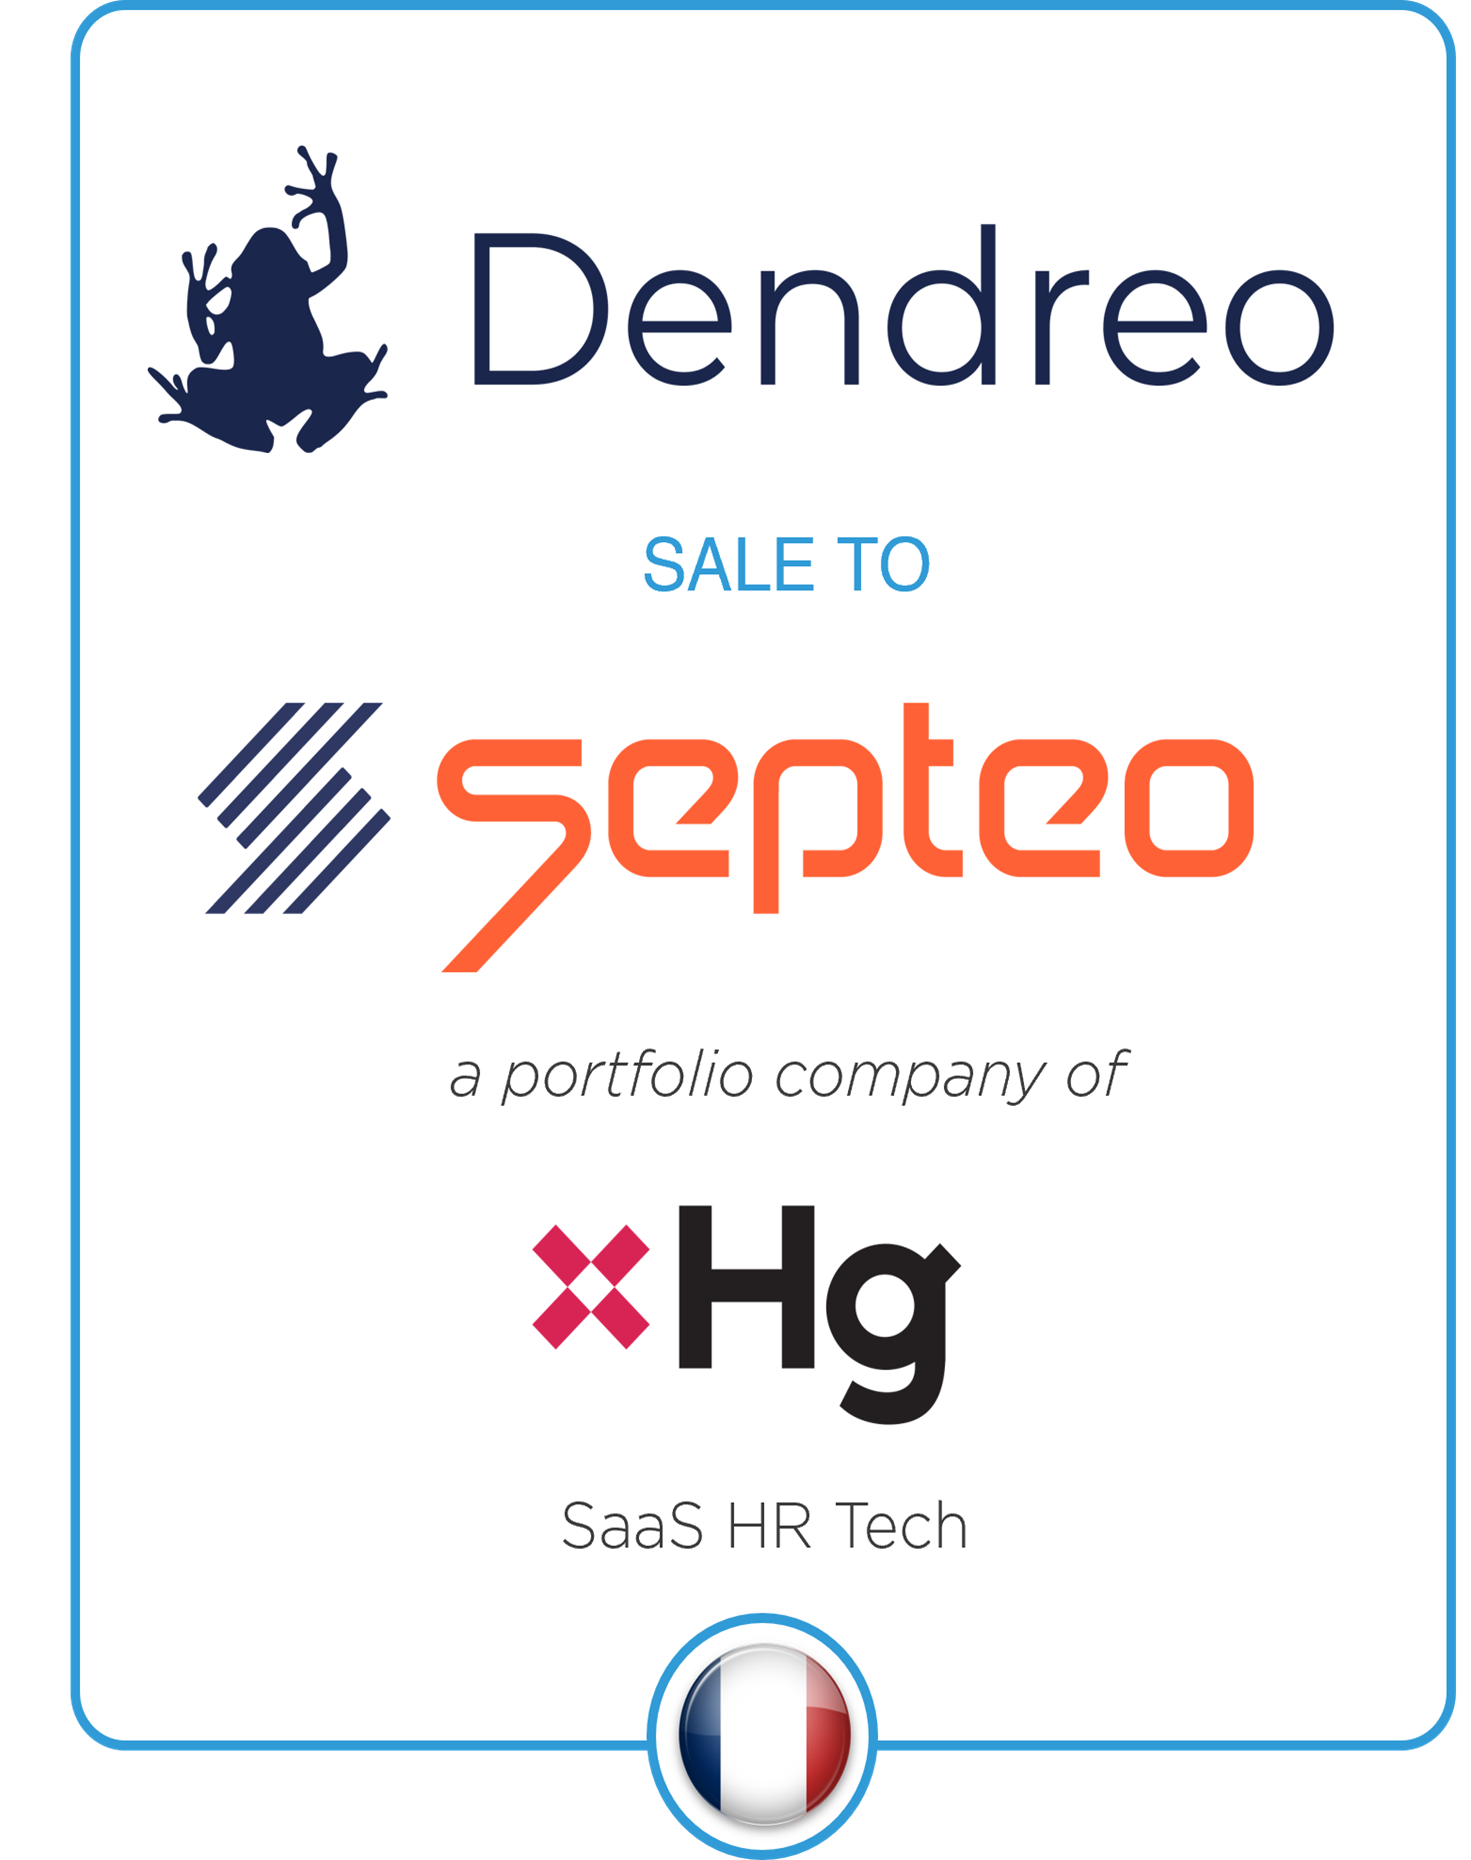 Drake Star Advises Dendreo on its Acquisition by Septeo